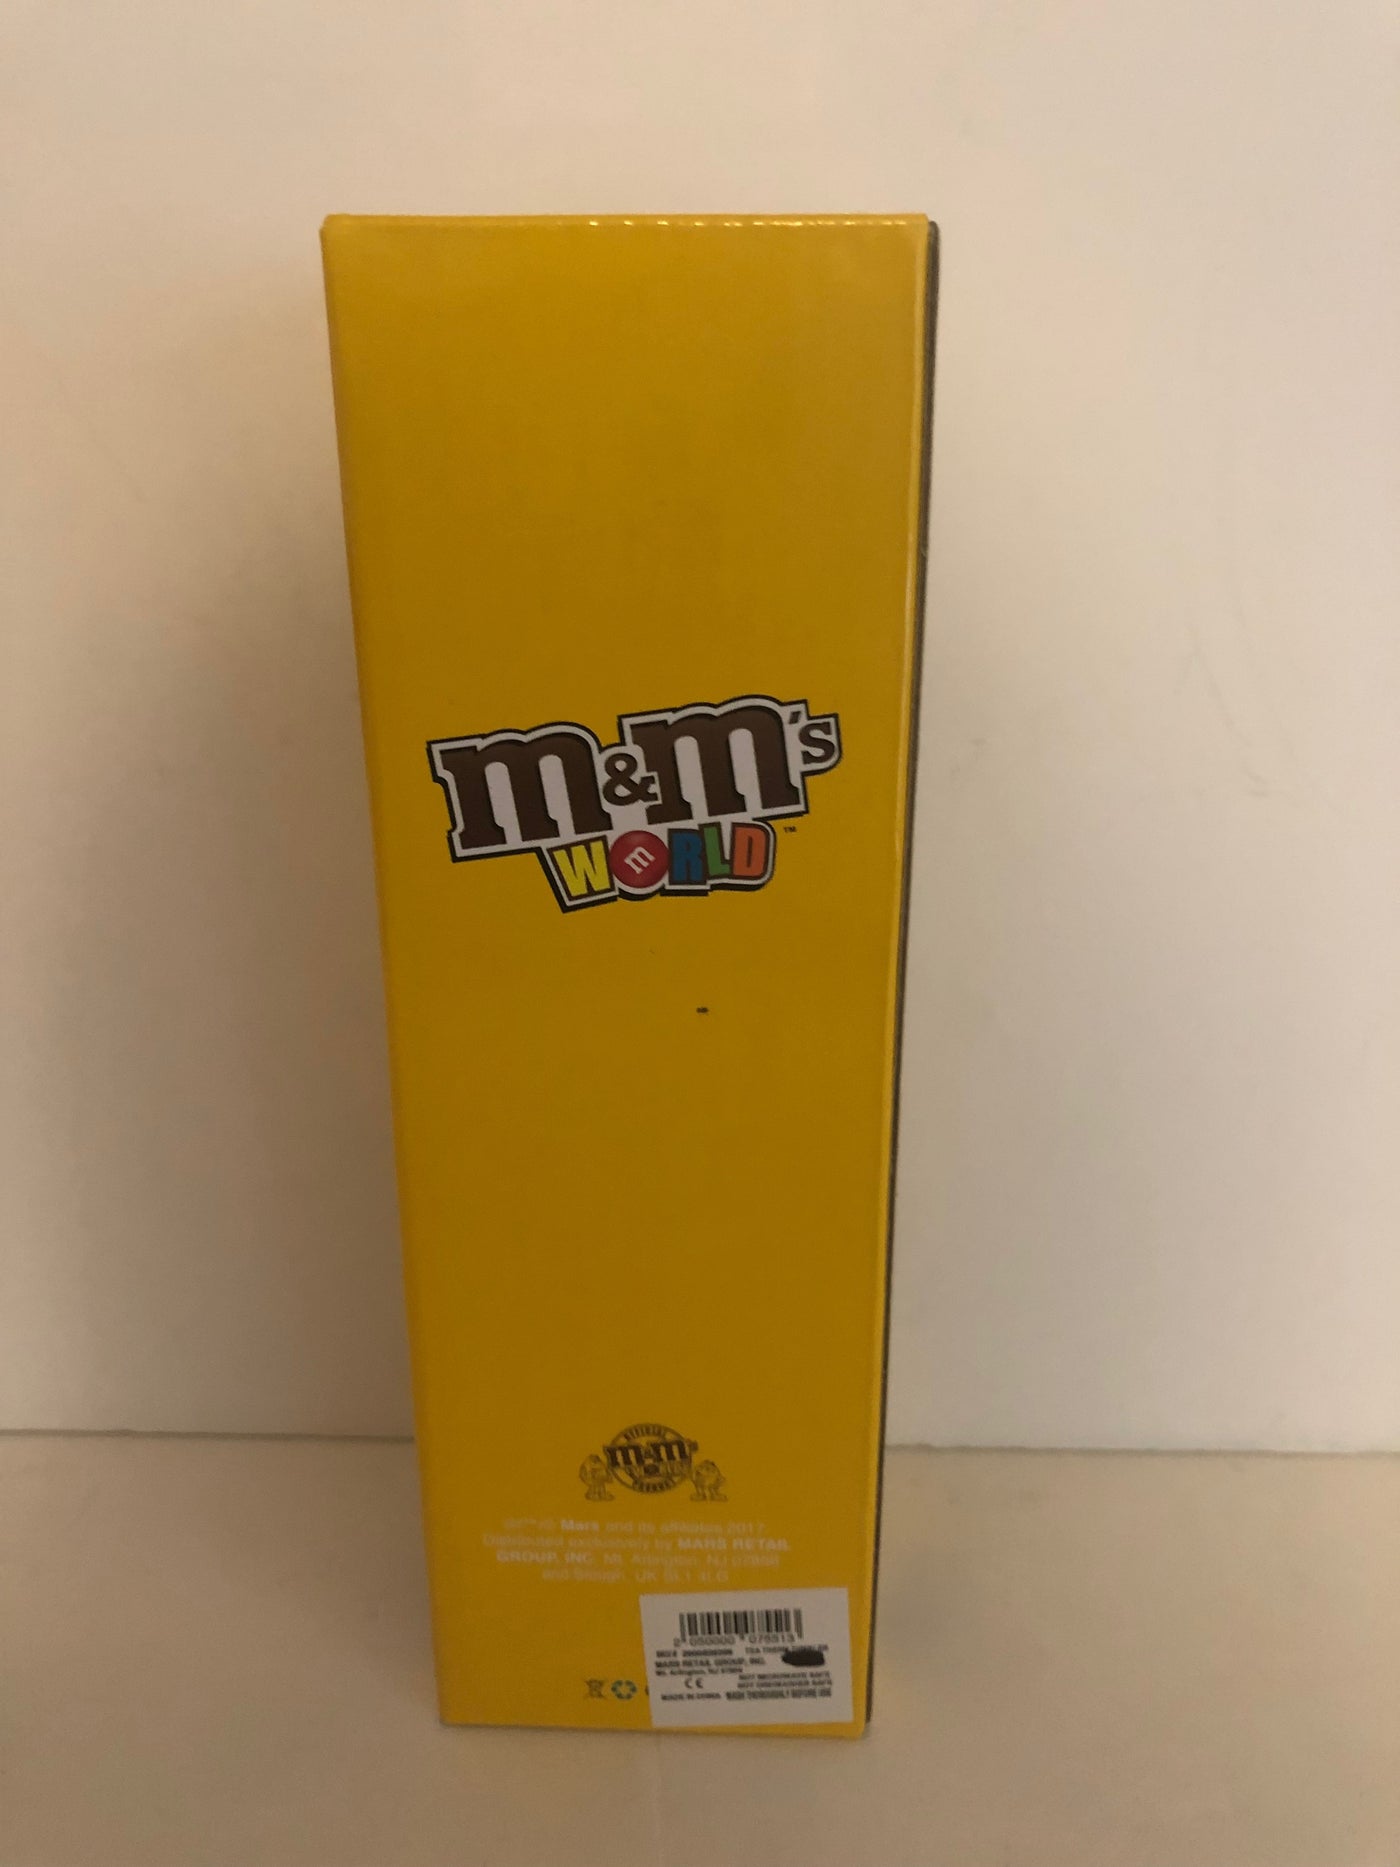 M&M's World Stainless Steel Tea Tumbler 10 oz New with Box